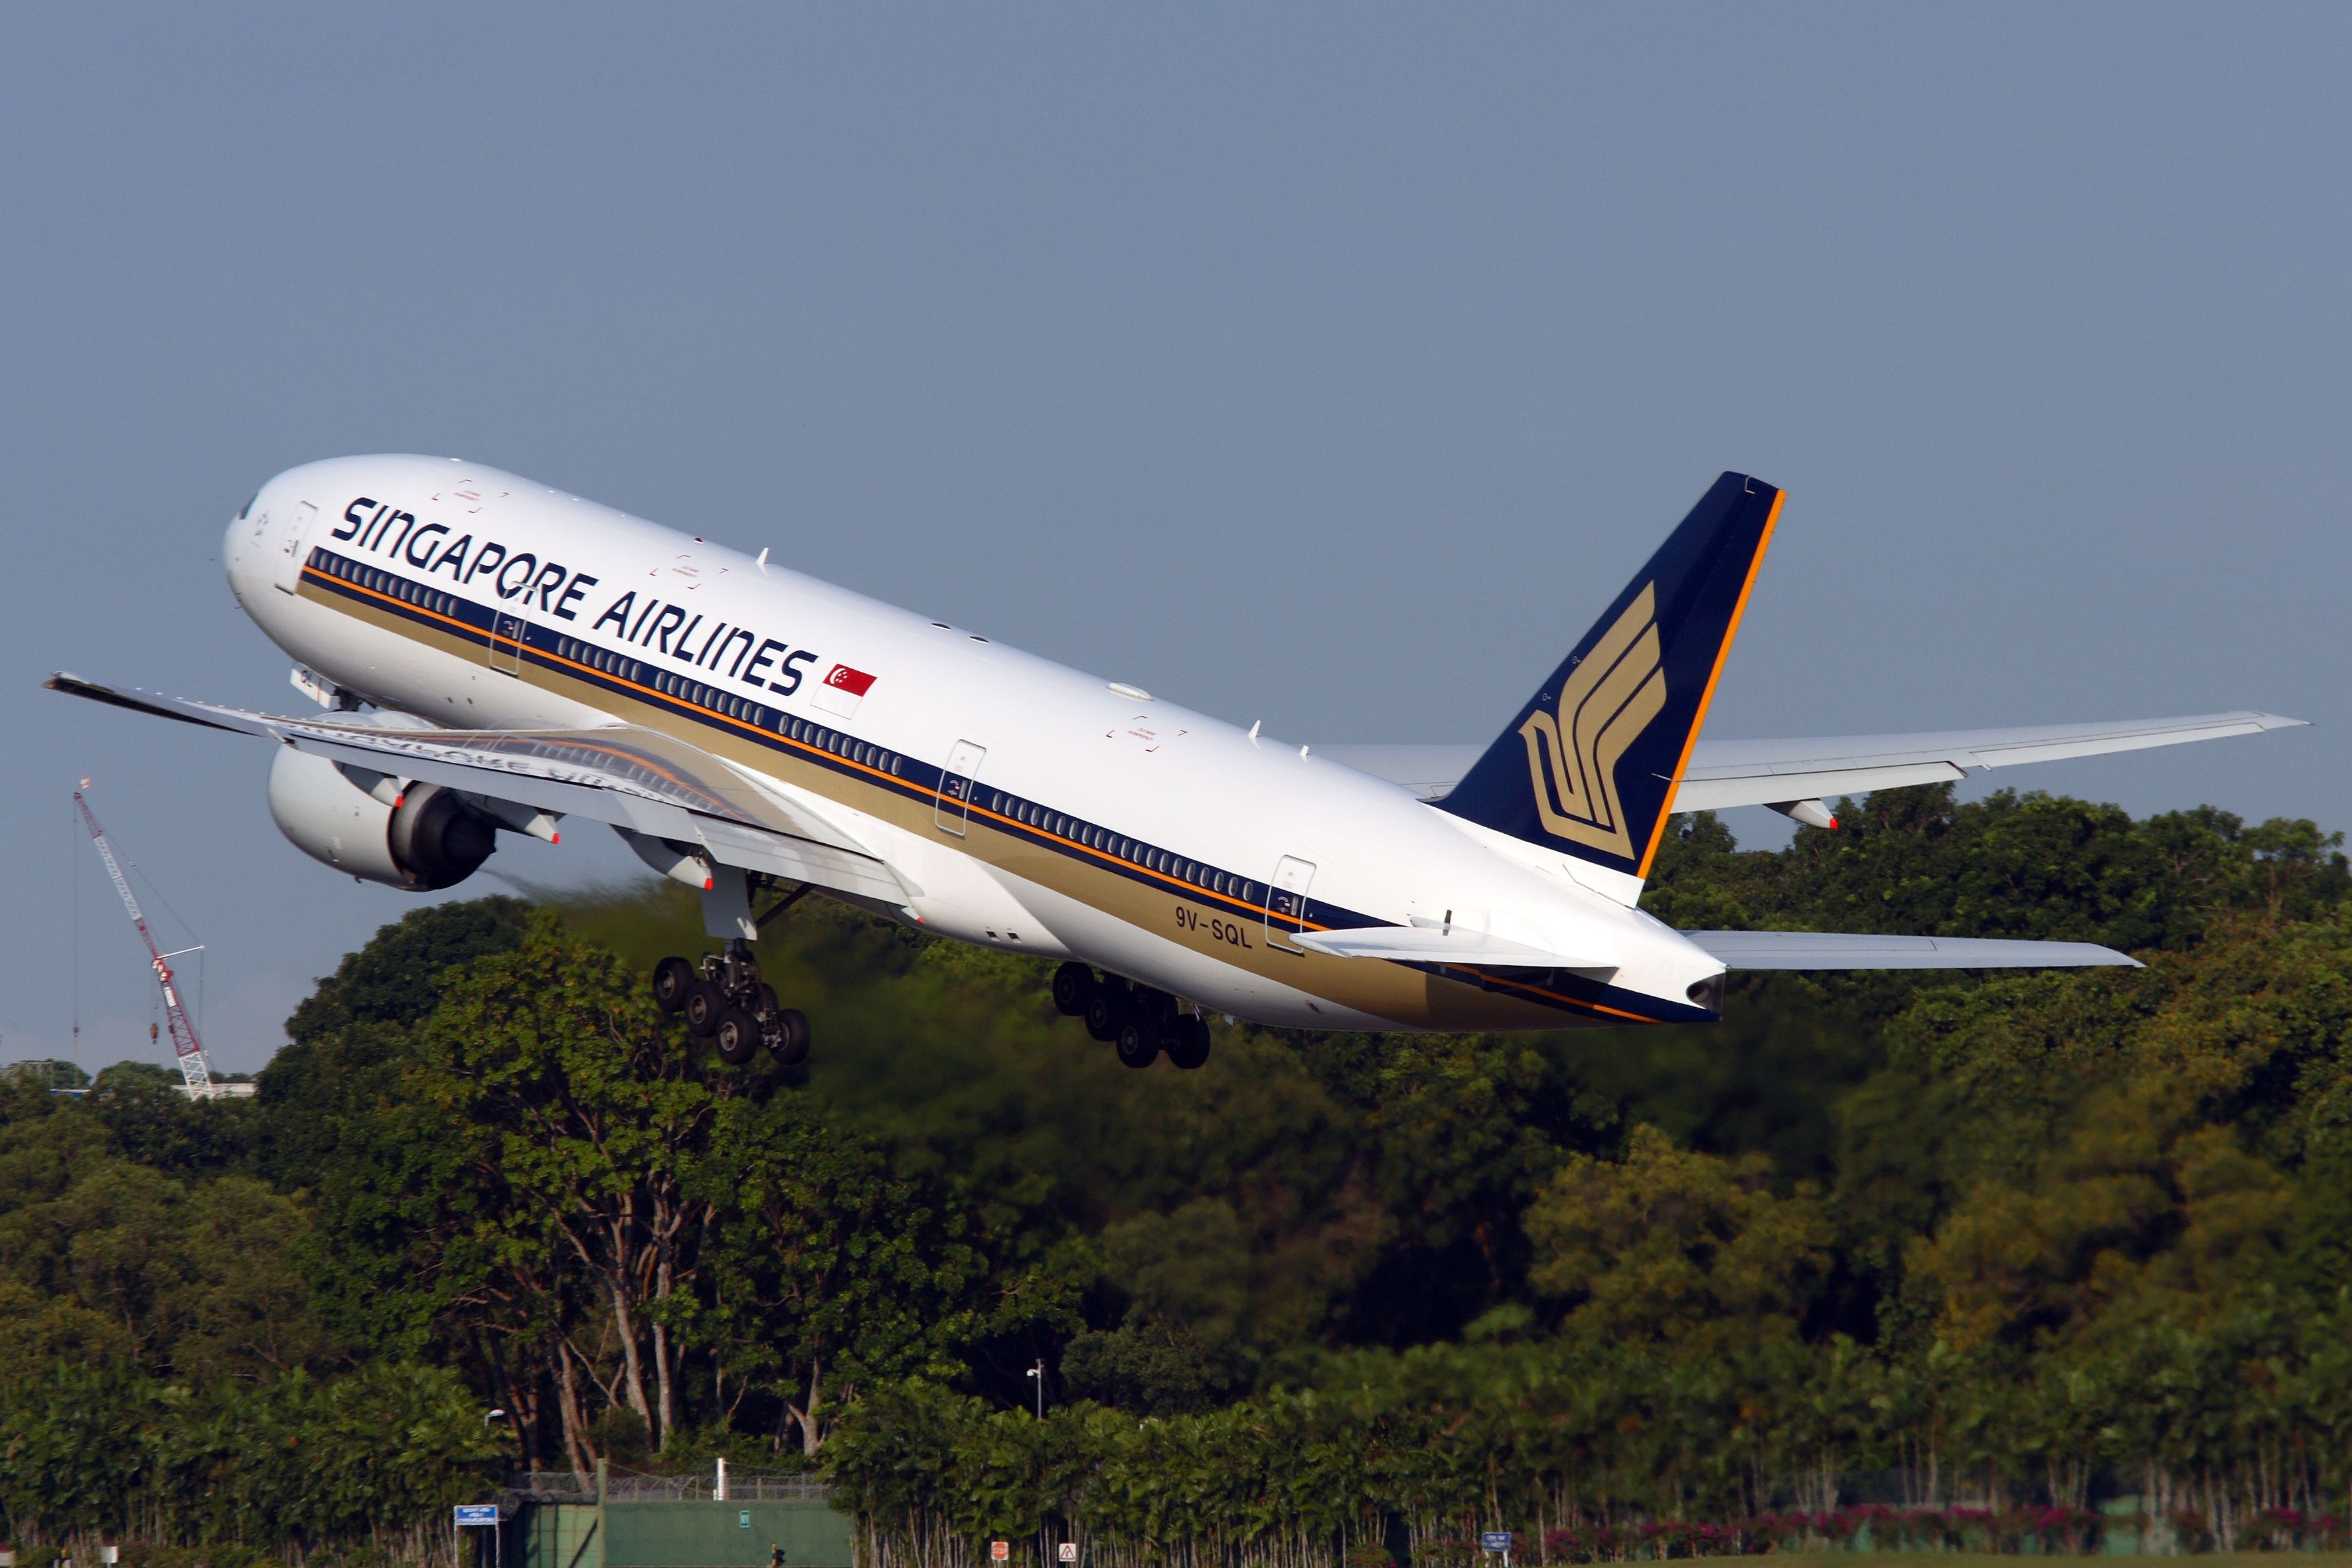 Singapore Airlines Boeing 777